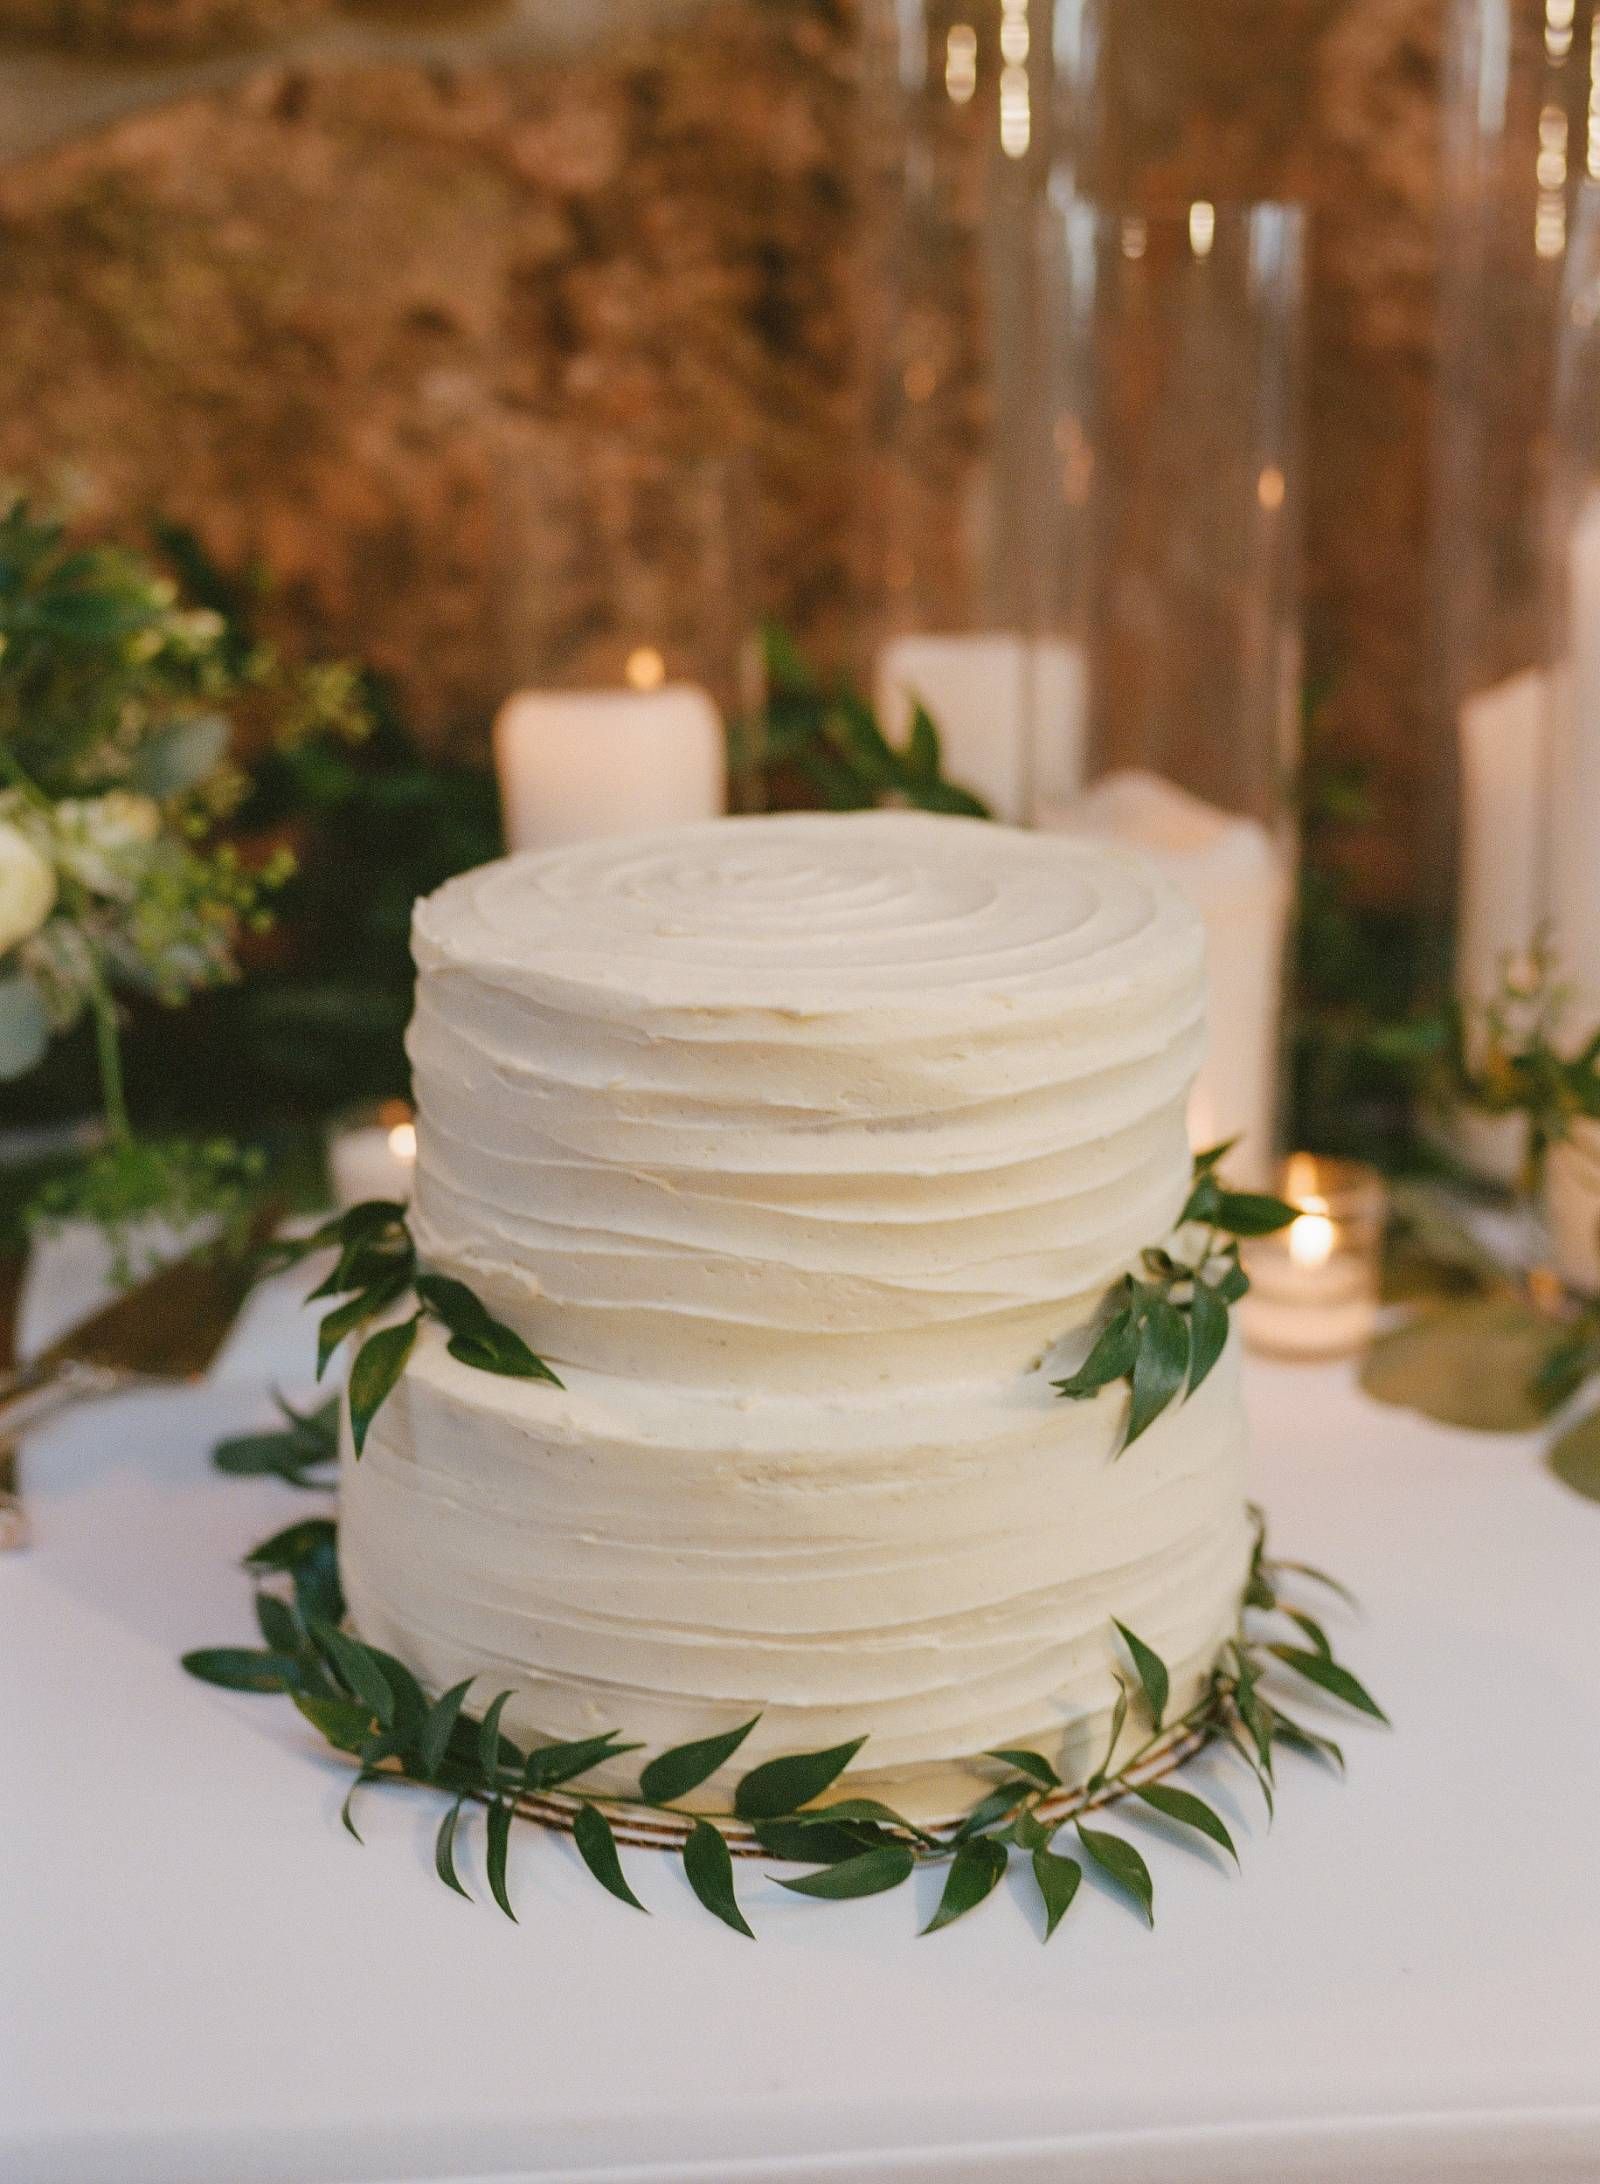 simple two tier buttercream wedding cake with greenery